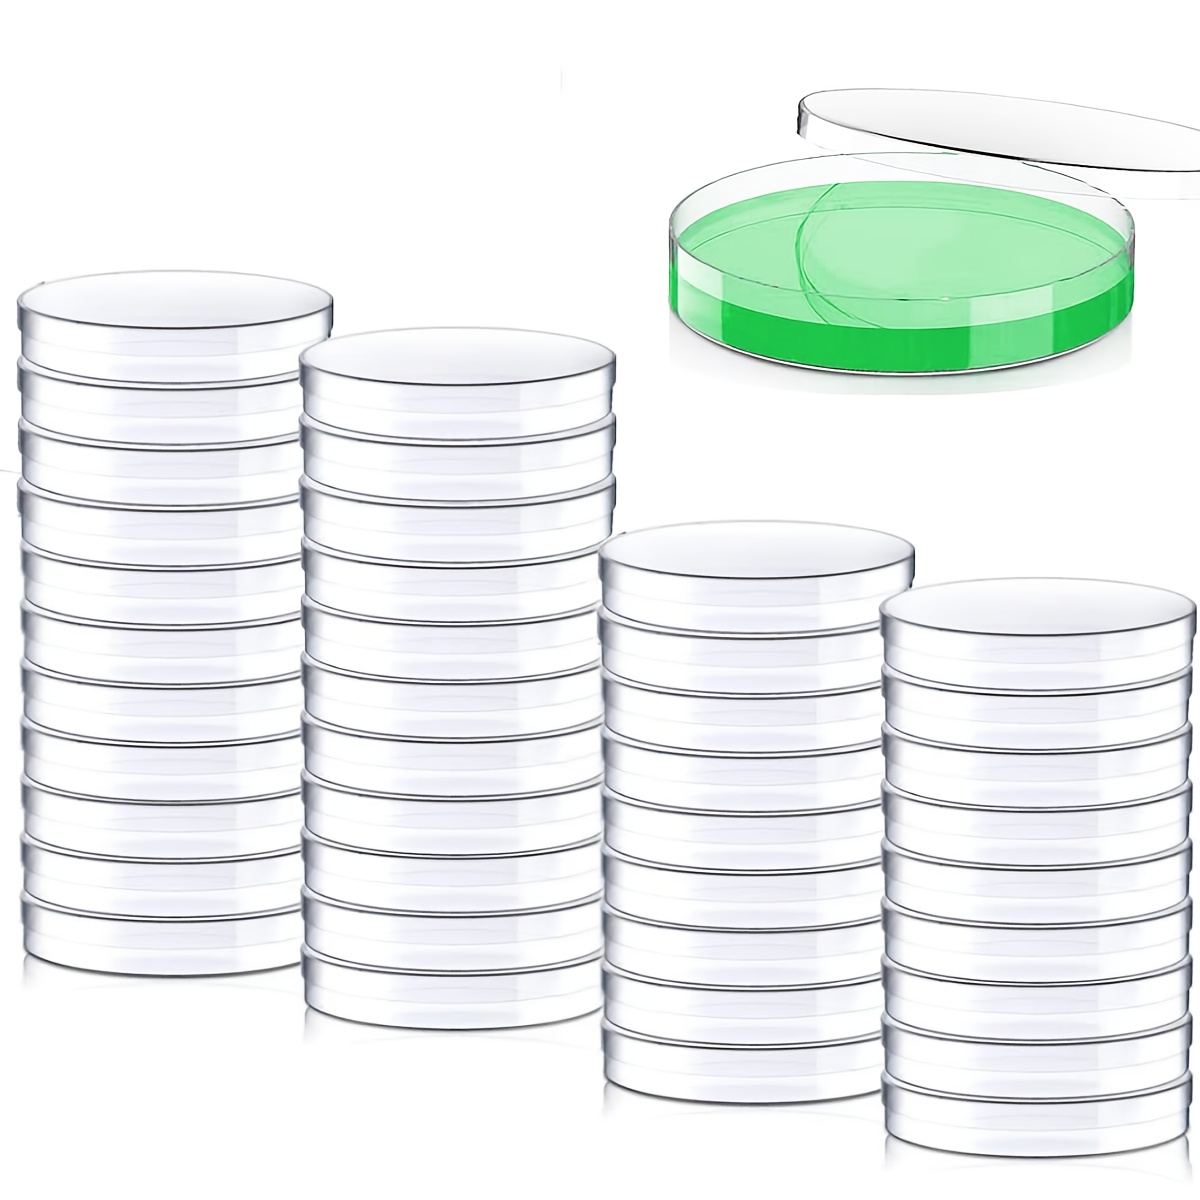 

20packs Plastic Cultivation Plates With Covers, Diameter 90mm X Depth 15mm, Cultivation Plates For Biological Research, School Science Projects, Seeds, Storage, And Biological Themed Parties